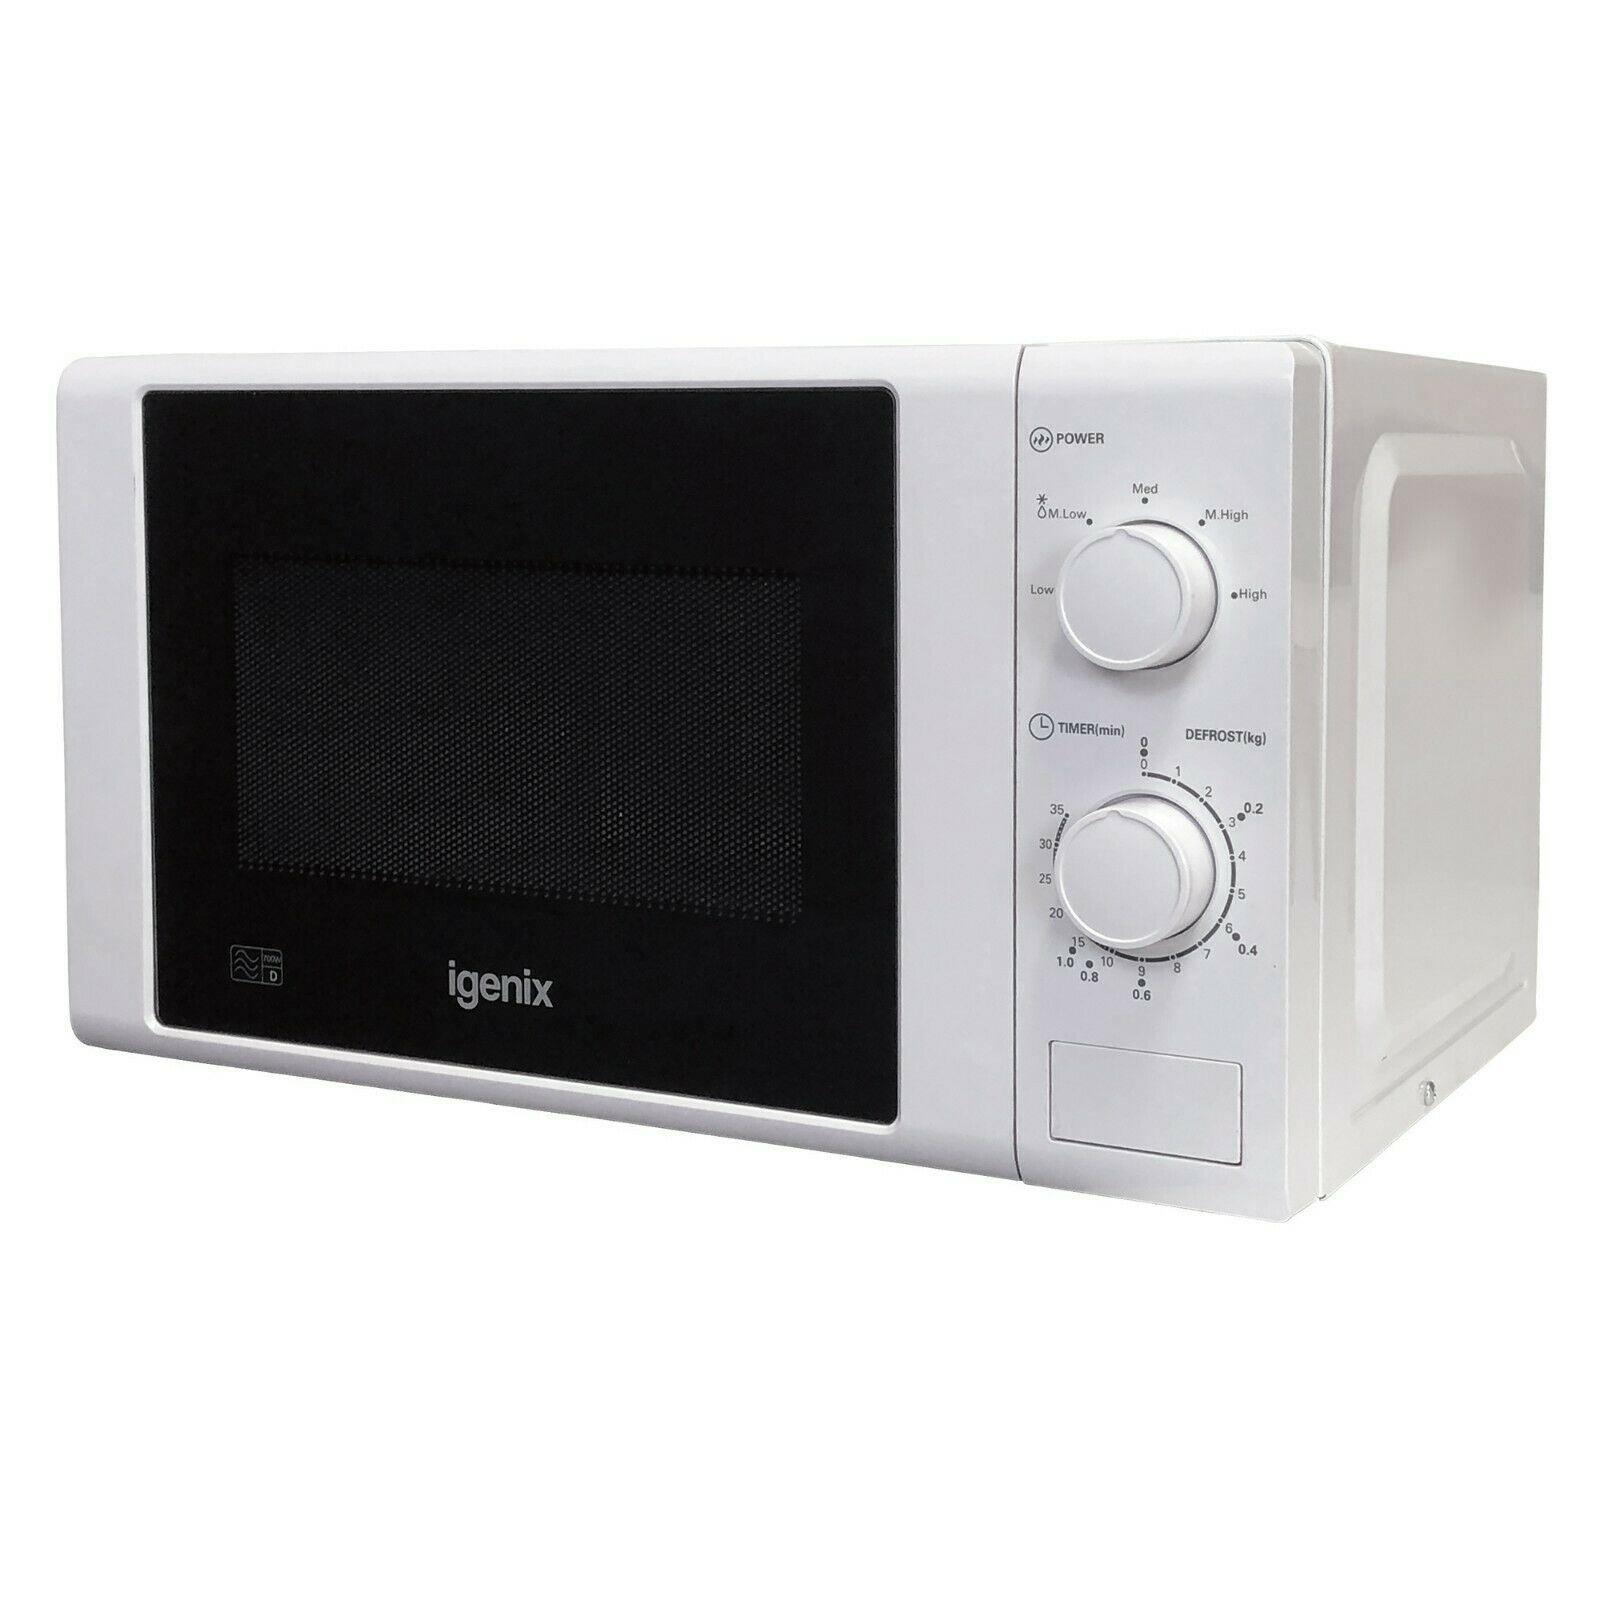 Maunal Microwave, 35 Minute Timer